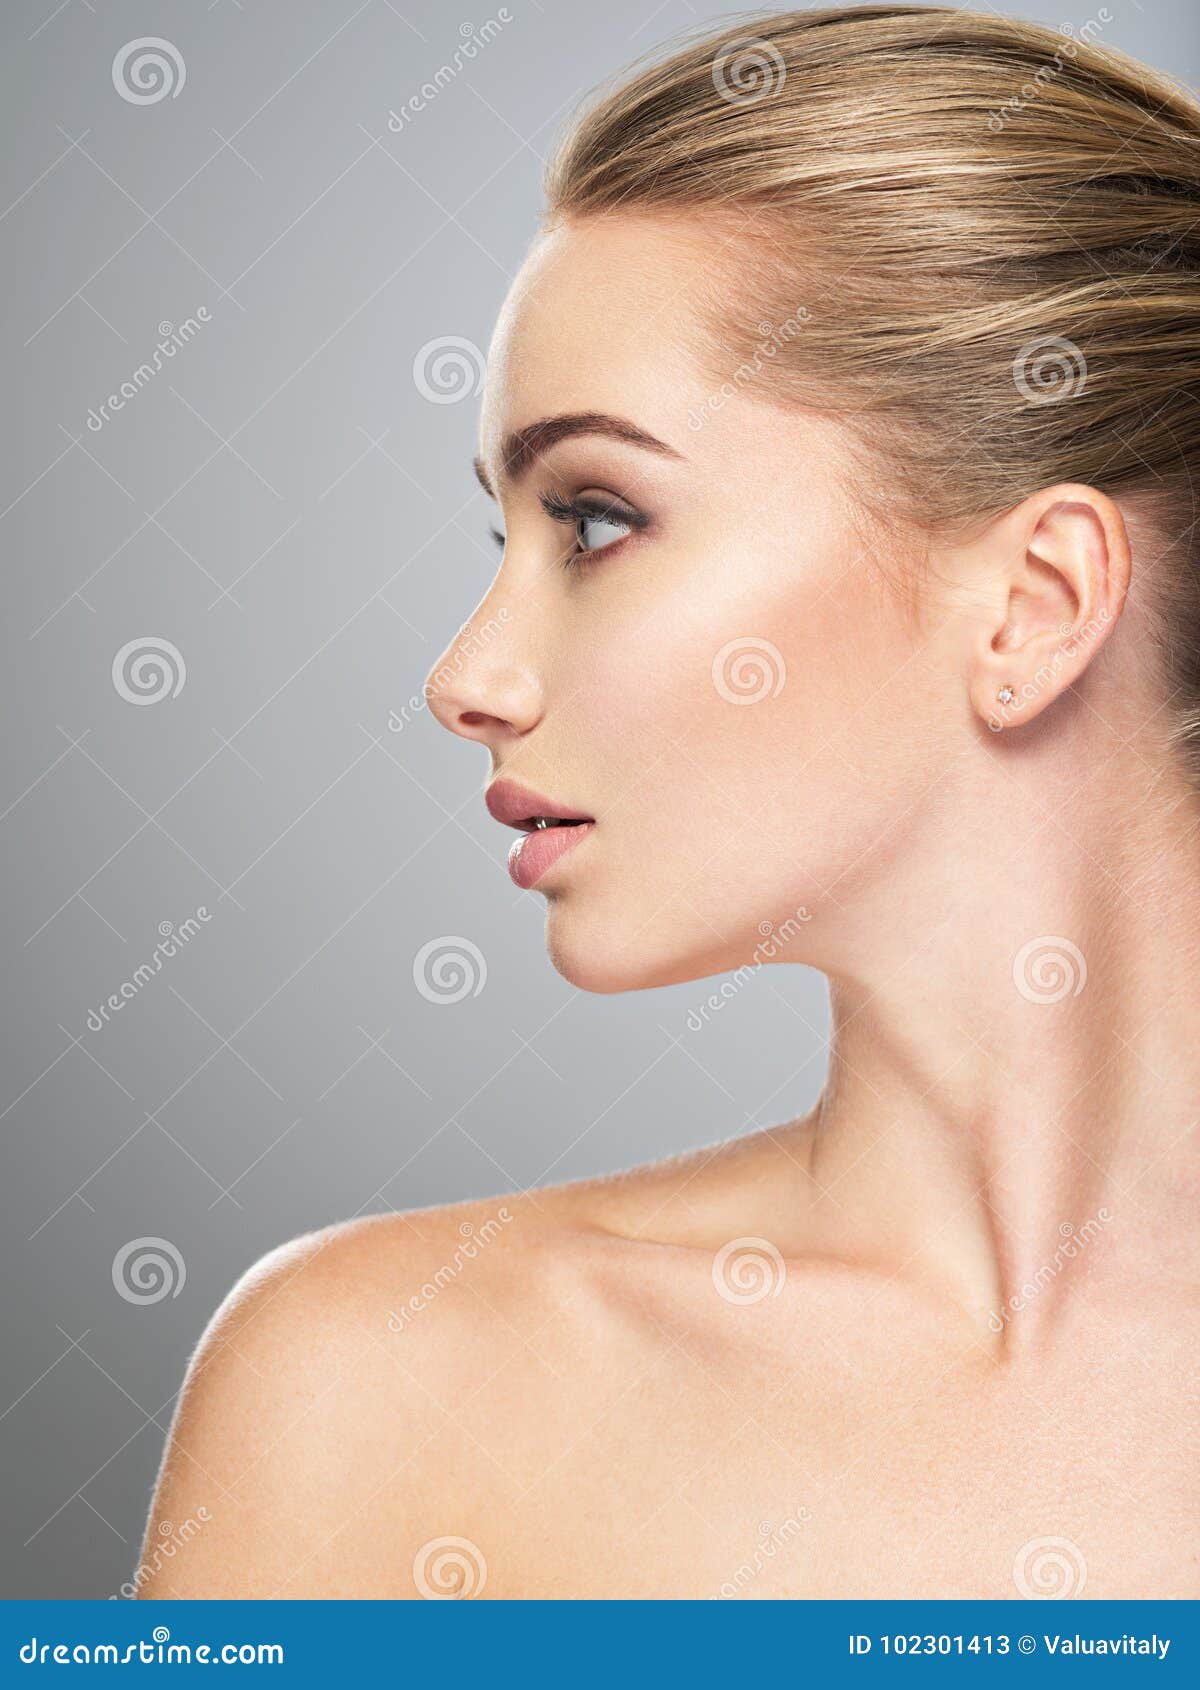 38 507 Profile Face Young Woman Photos Free Royalty Free Stock Photos From Dreamstime